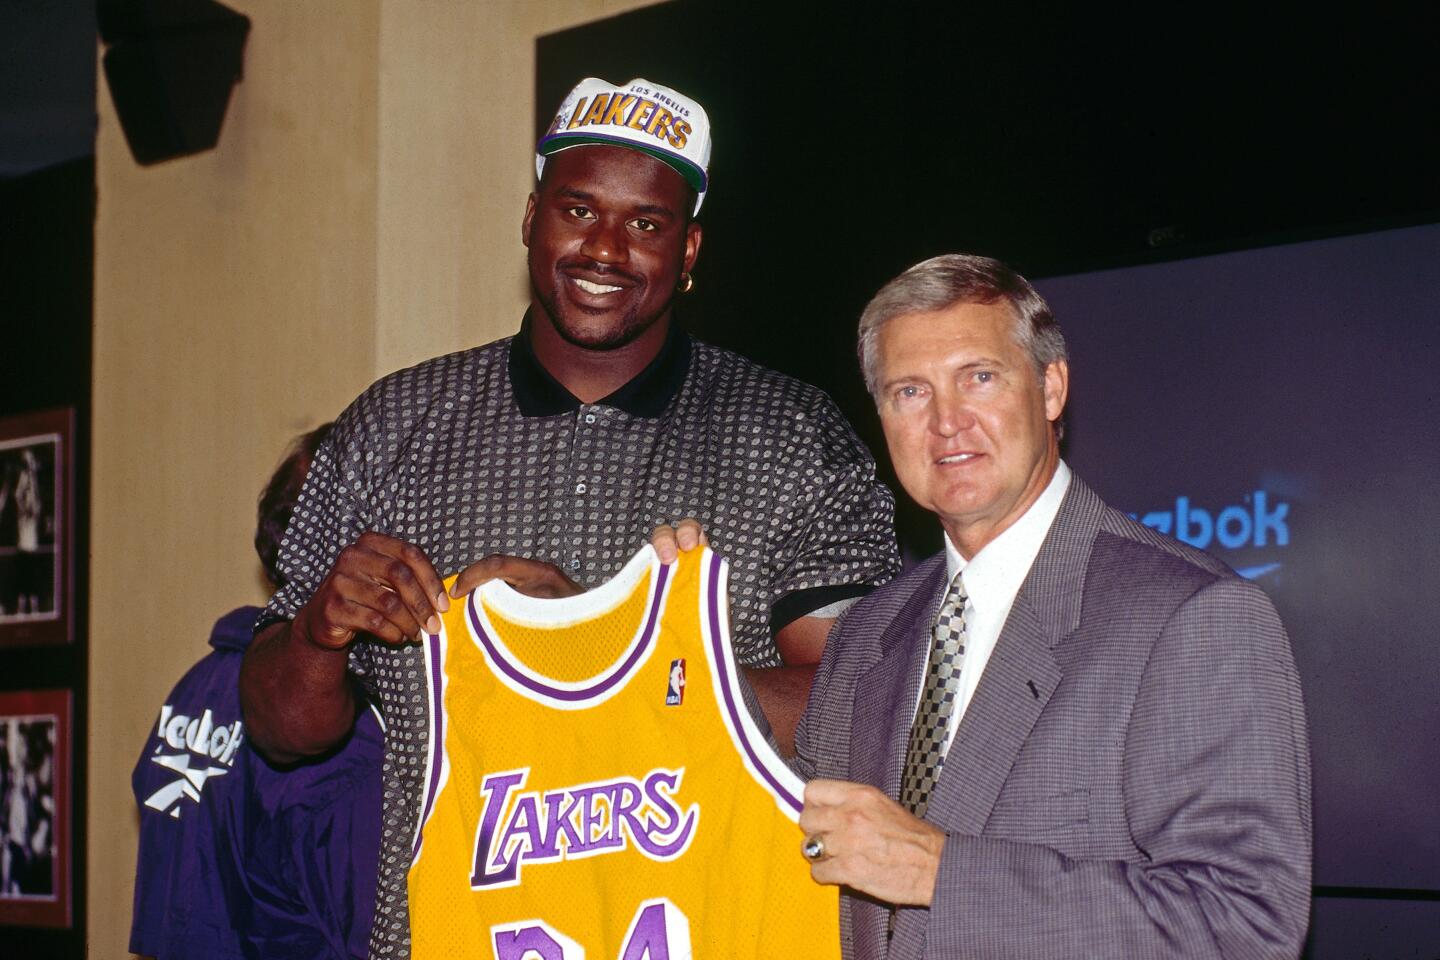 Shaquille O'Neal poses with Jerry West after signing with the Lakers on July 19, 1996, at the Forum.